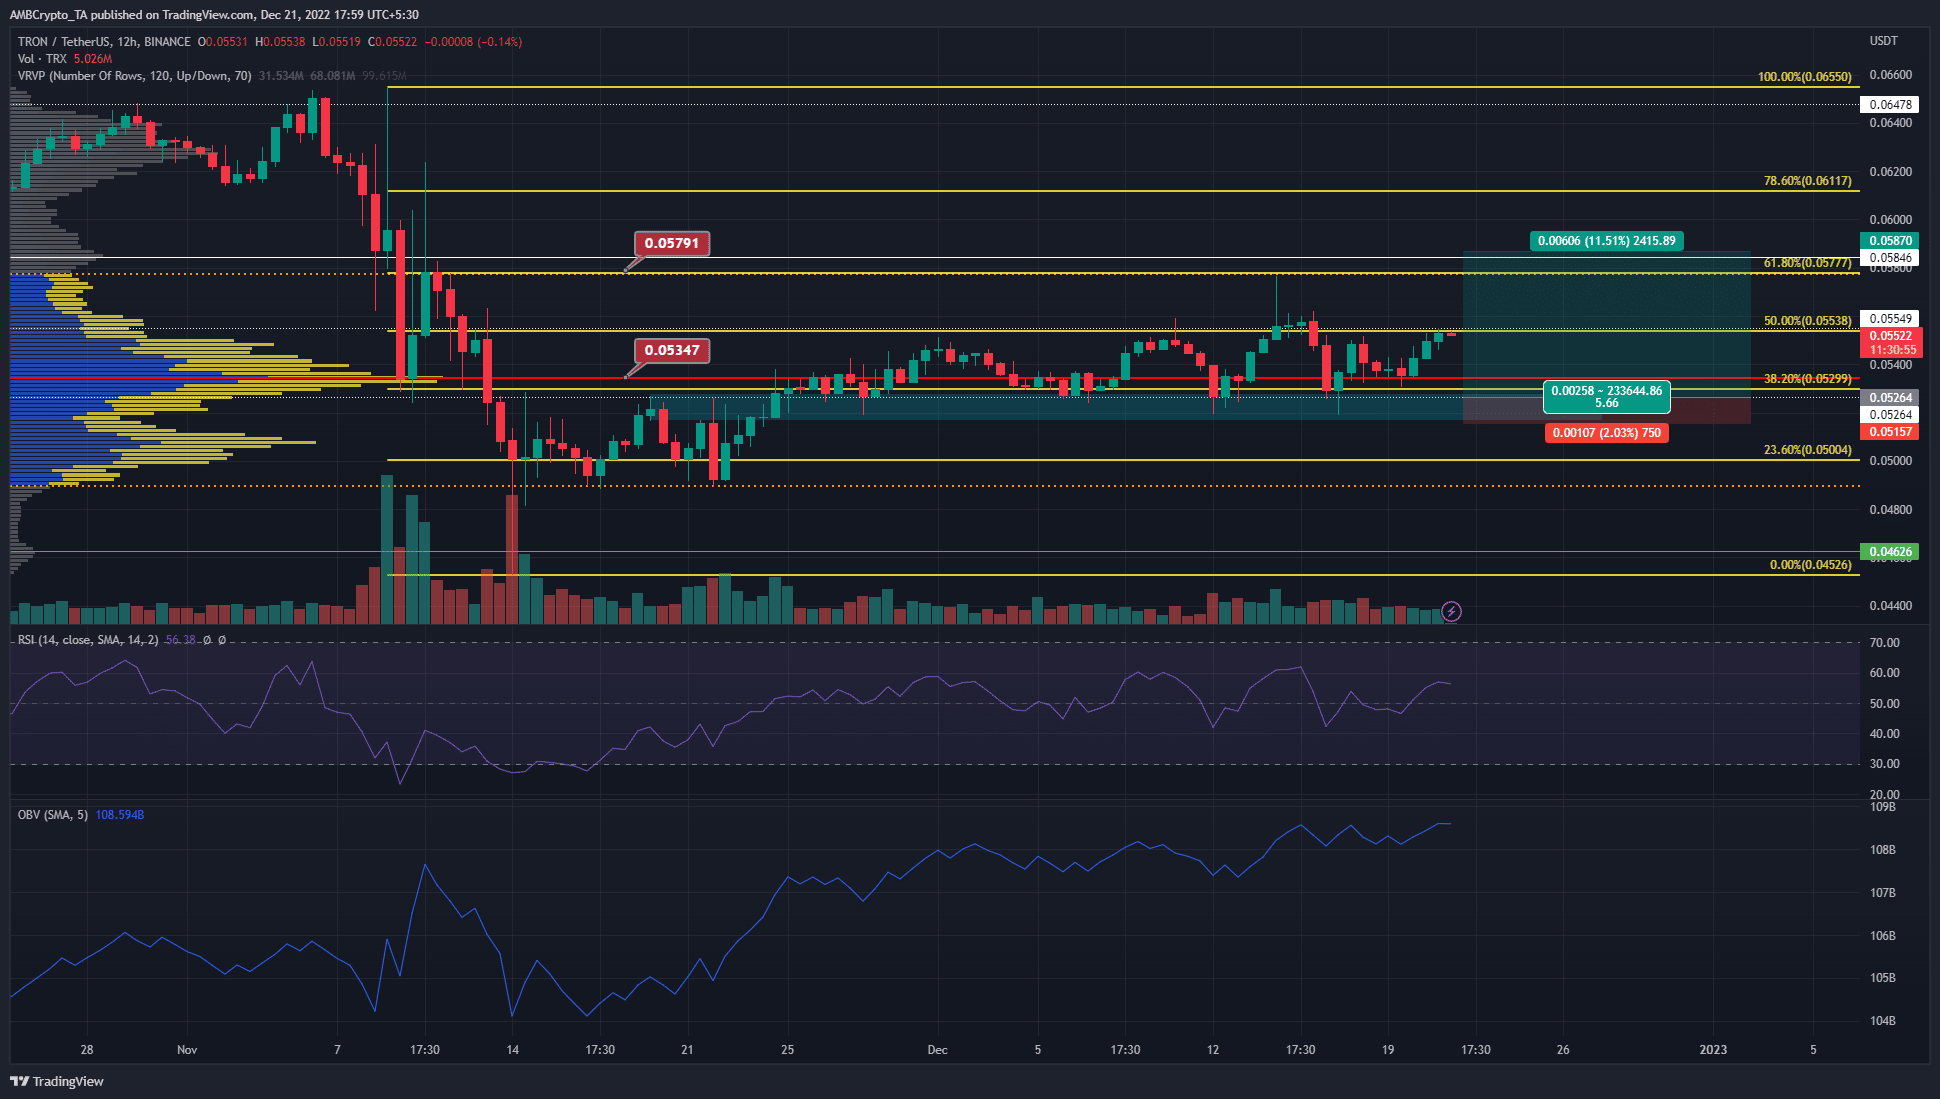 TRON in a healthy uptrend despite fear in the market, should bulls look to buy?